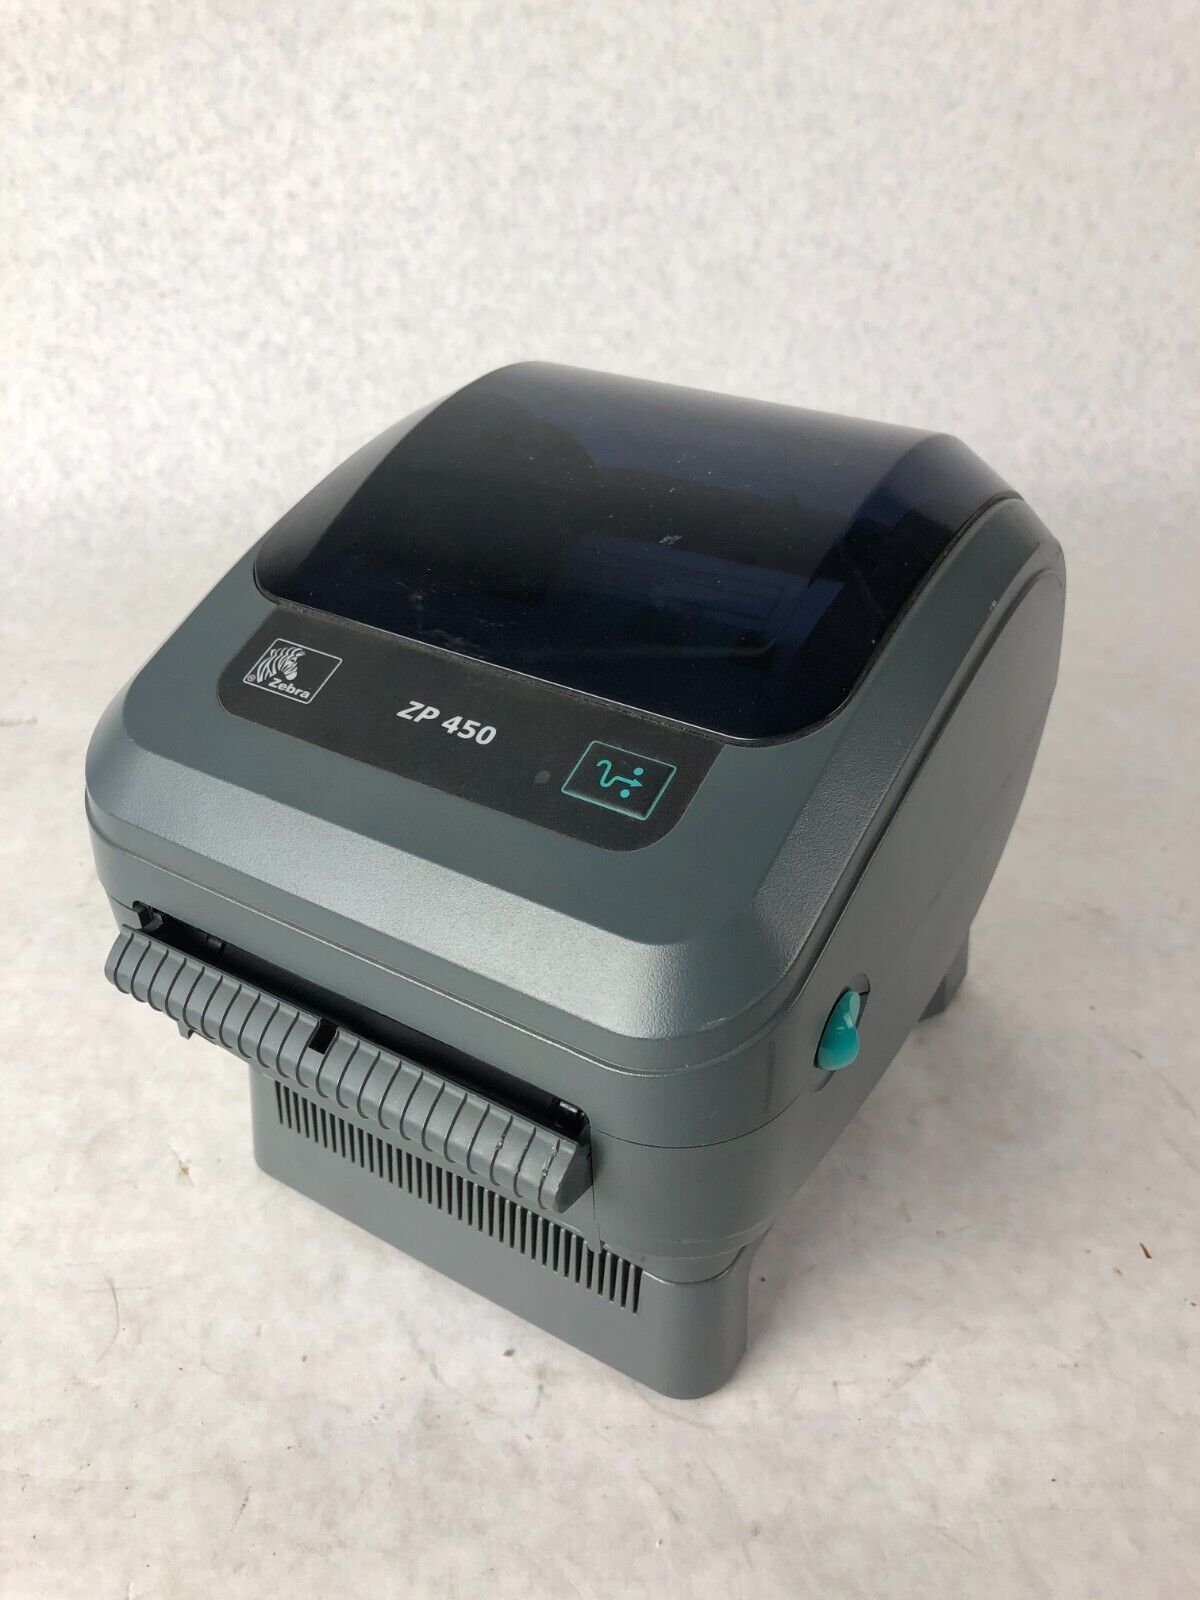 Zebra ZP450 Thermal UPS Shipping Label Barcode Printer USB Serial - Tested